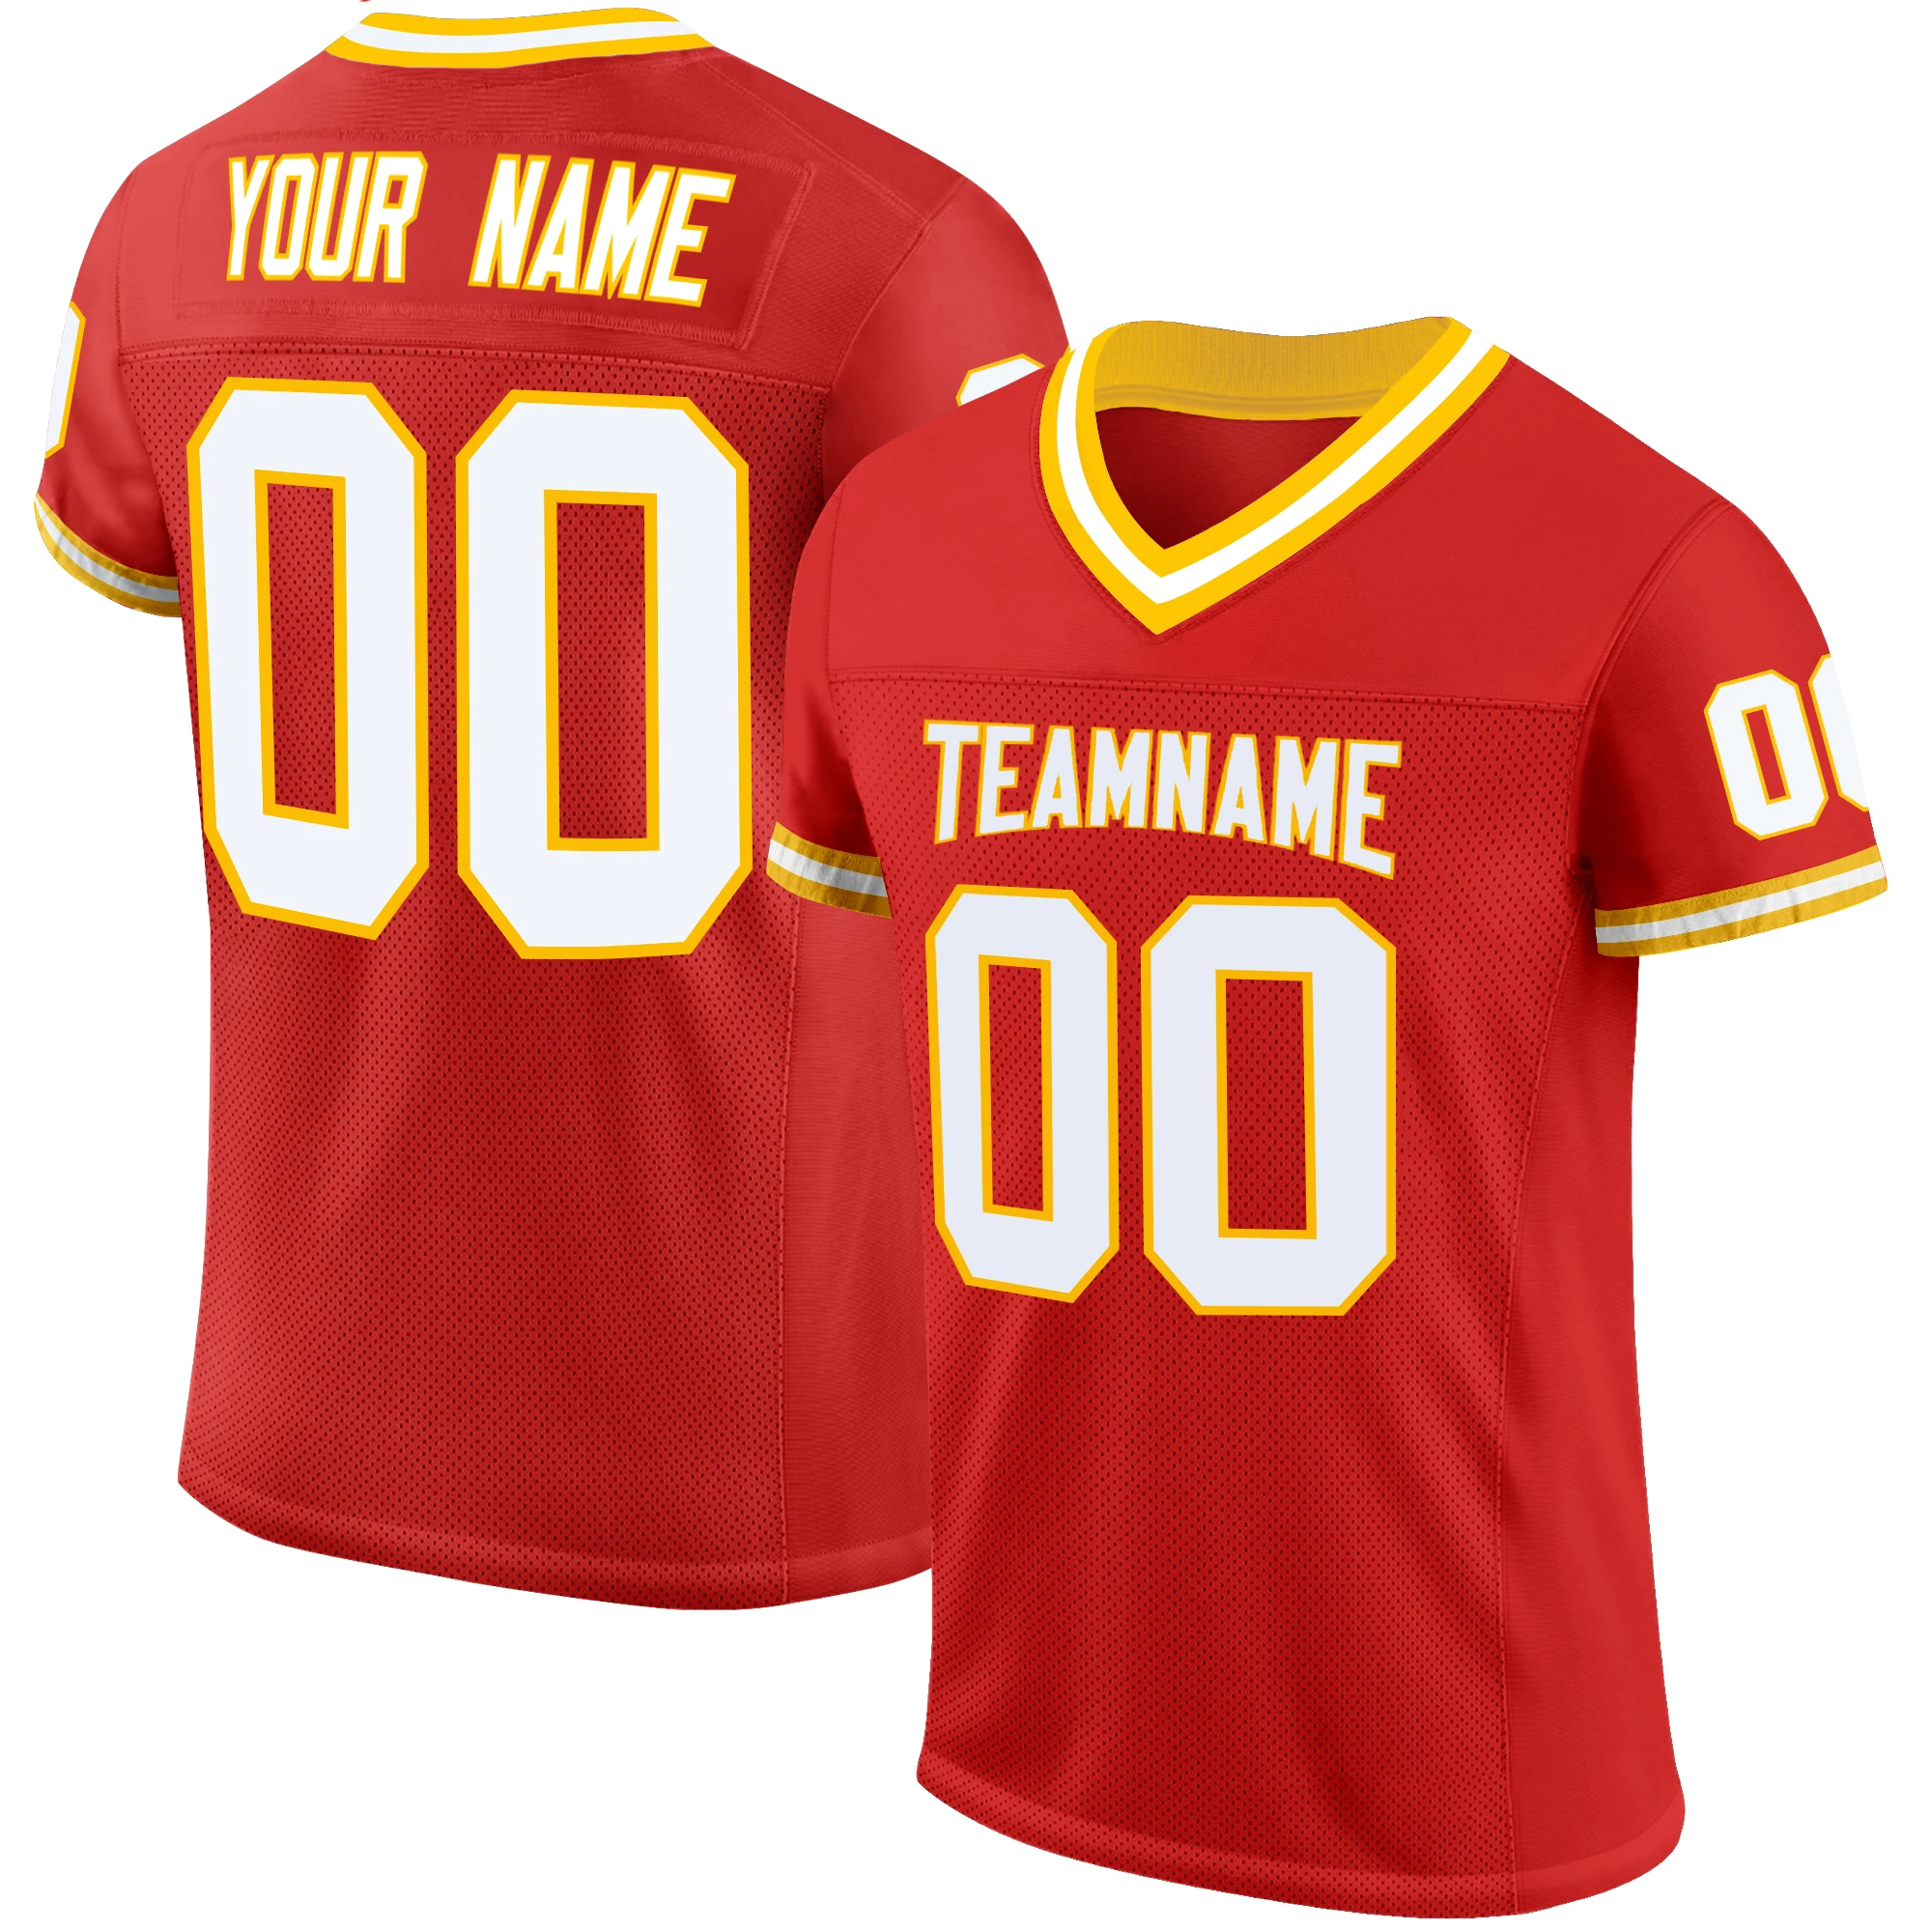 Custom Orange Adult Mesh Make Your Own Football Jersey Embroidered Team Name and Your Numbers 